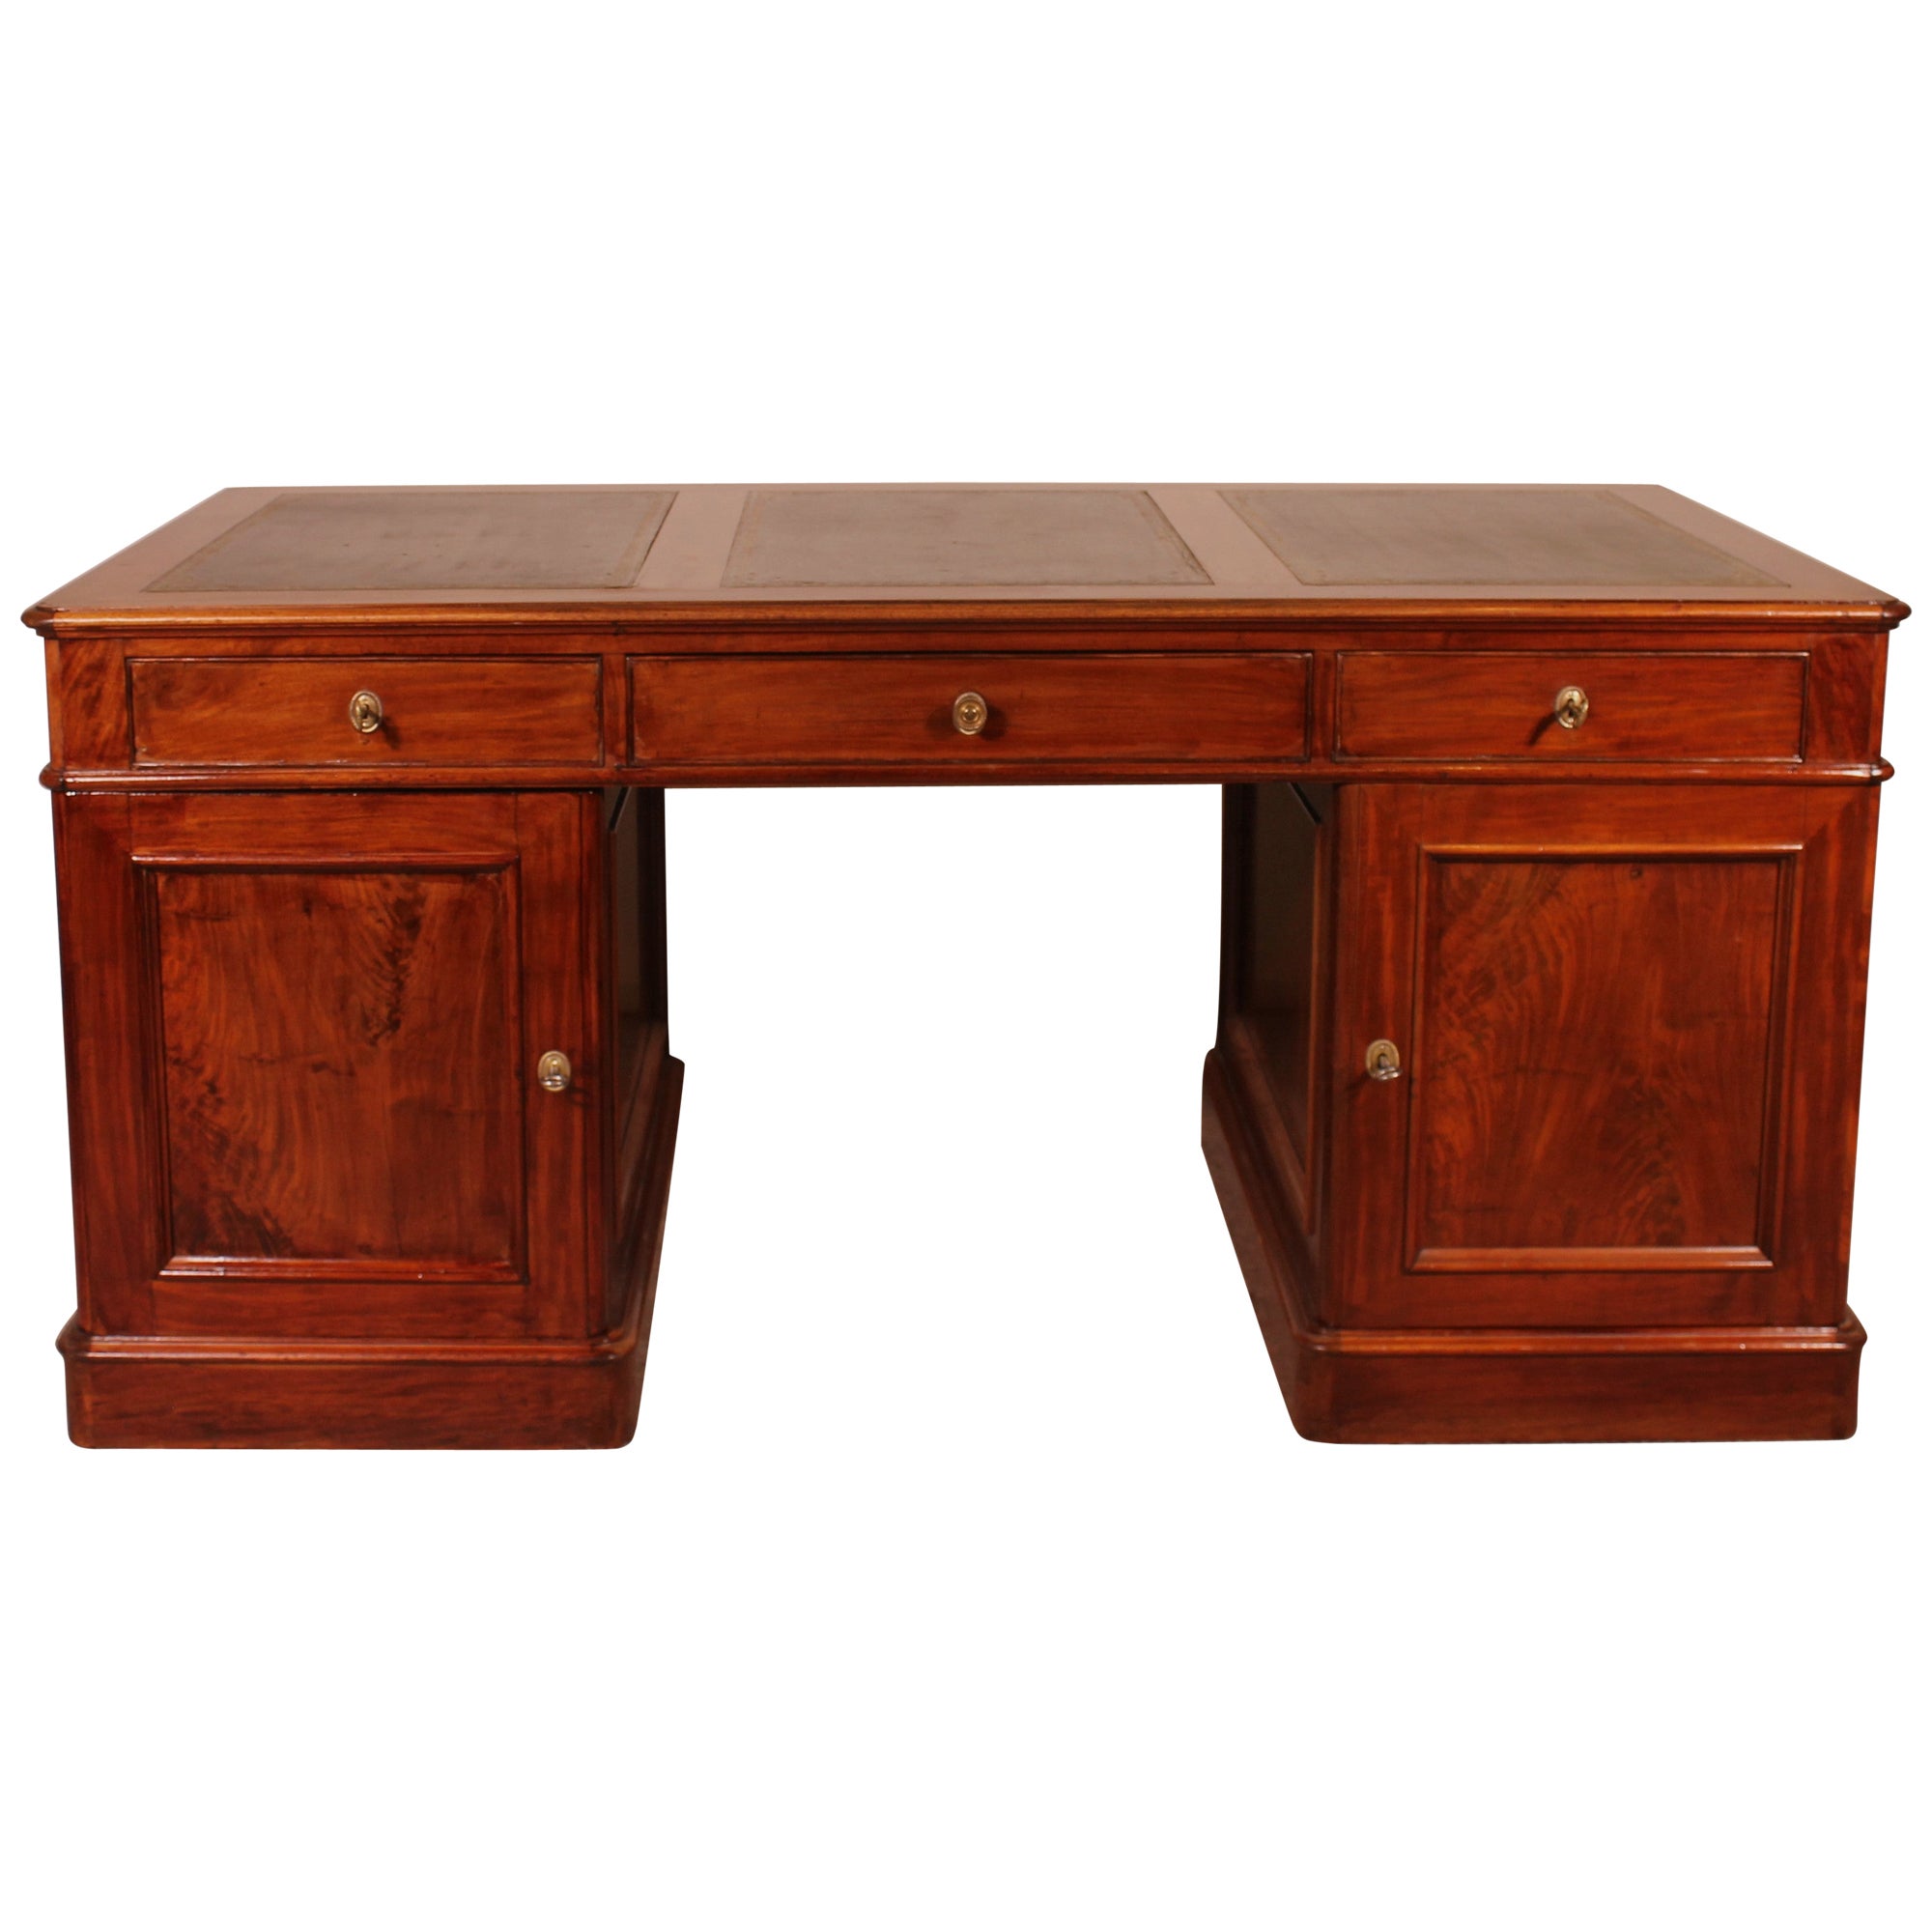 Large Pedestal Desk In Mahogany From The 19th Century For Sale